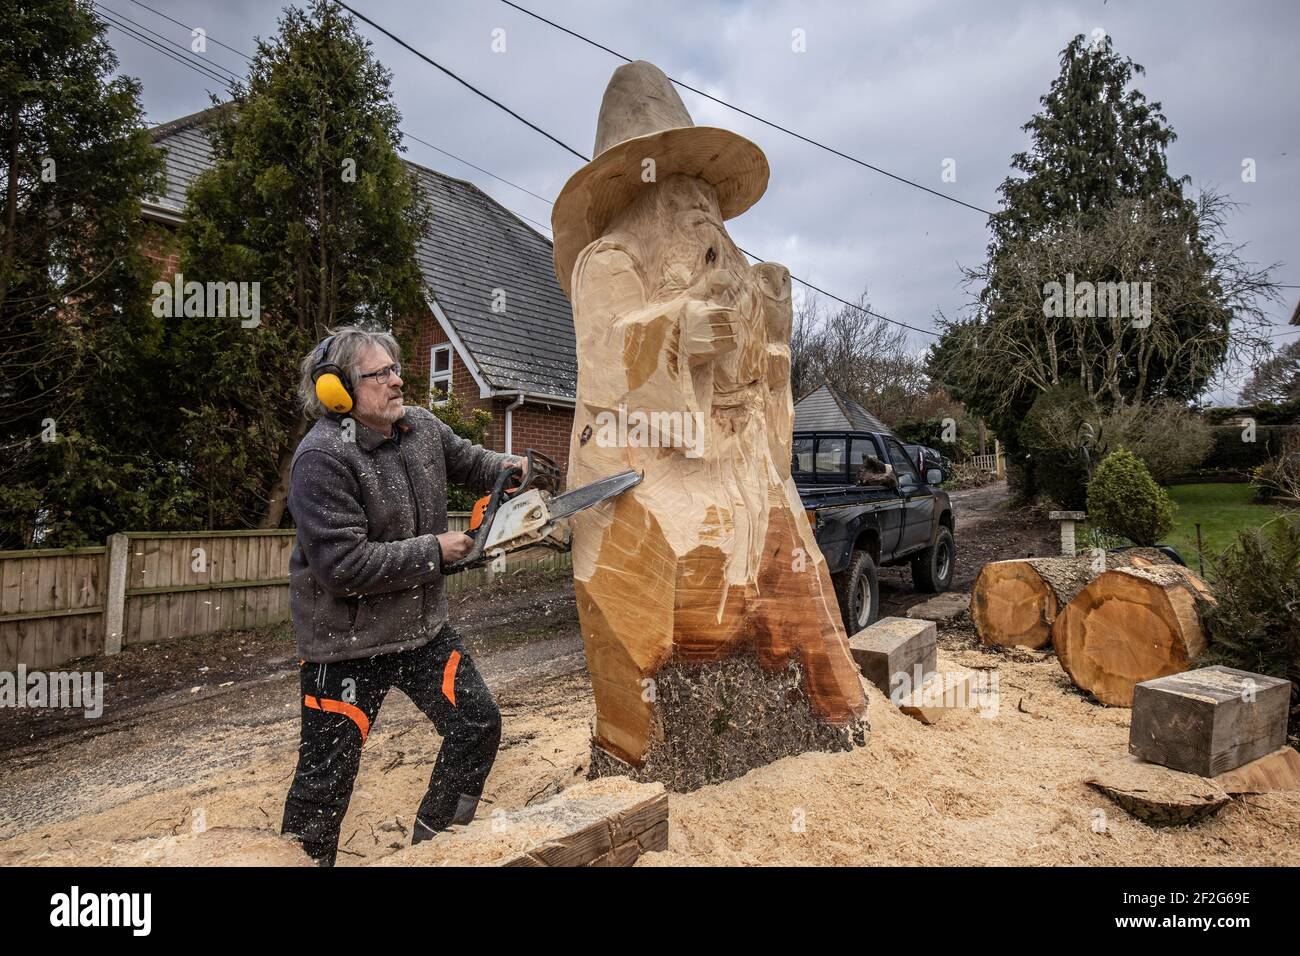 Jona Cleaver carving a giant sized wood sculpture of Gandalf from Lord of The Rings out of a maple tree for a private commission, Hampshire, England Stock Photo